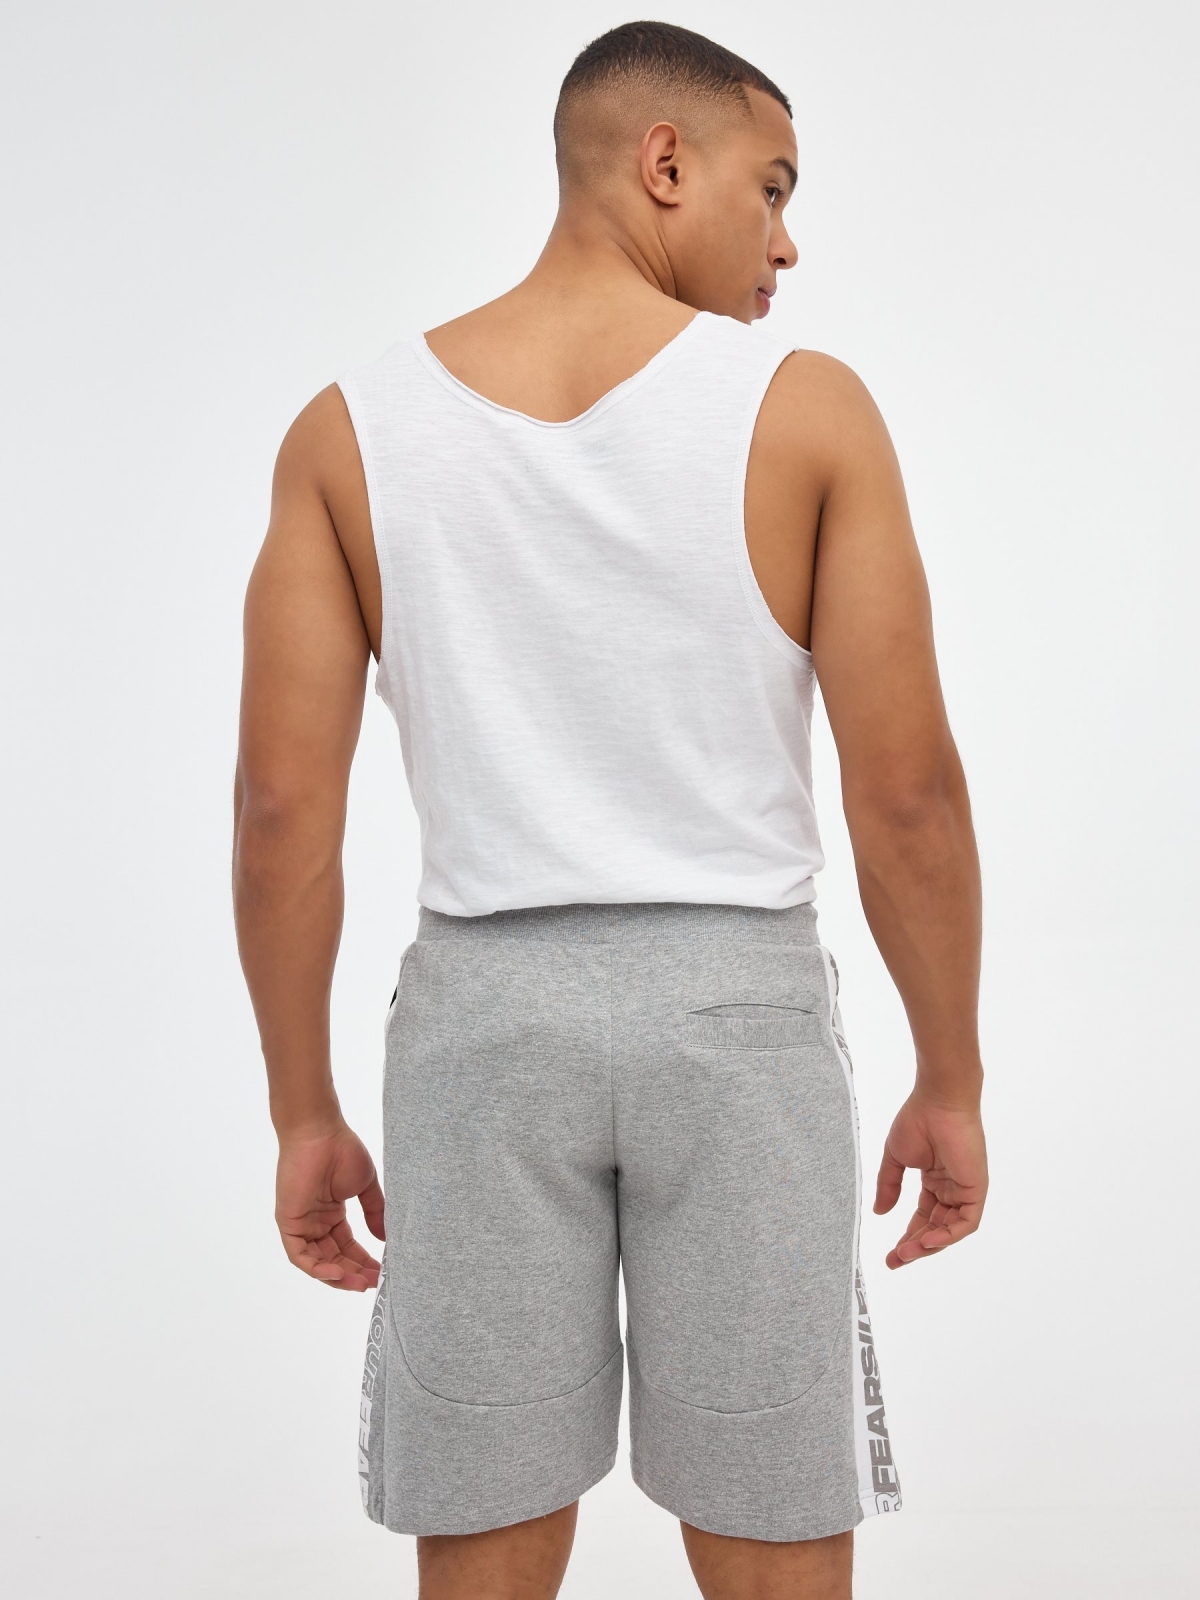 Bermuda jogger shorts with text grey middle back view